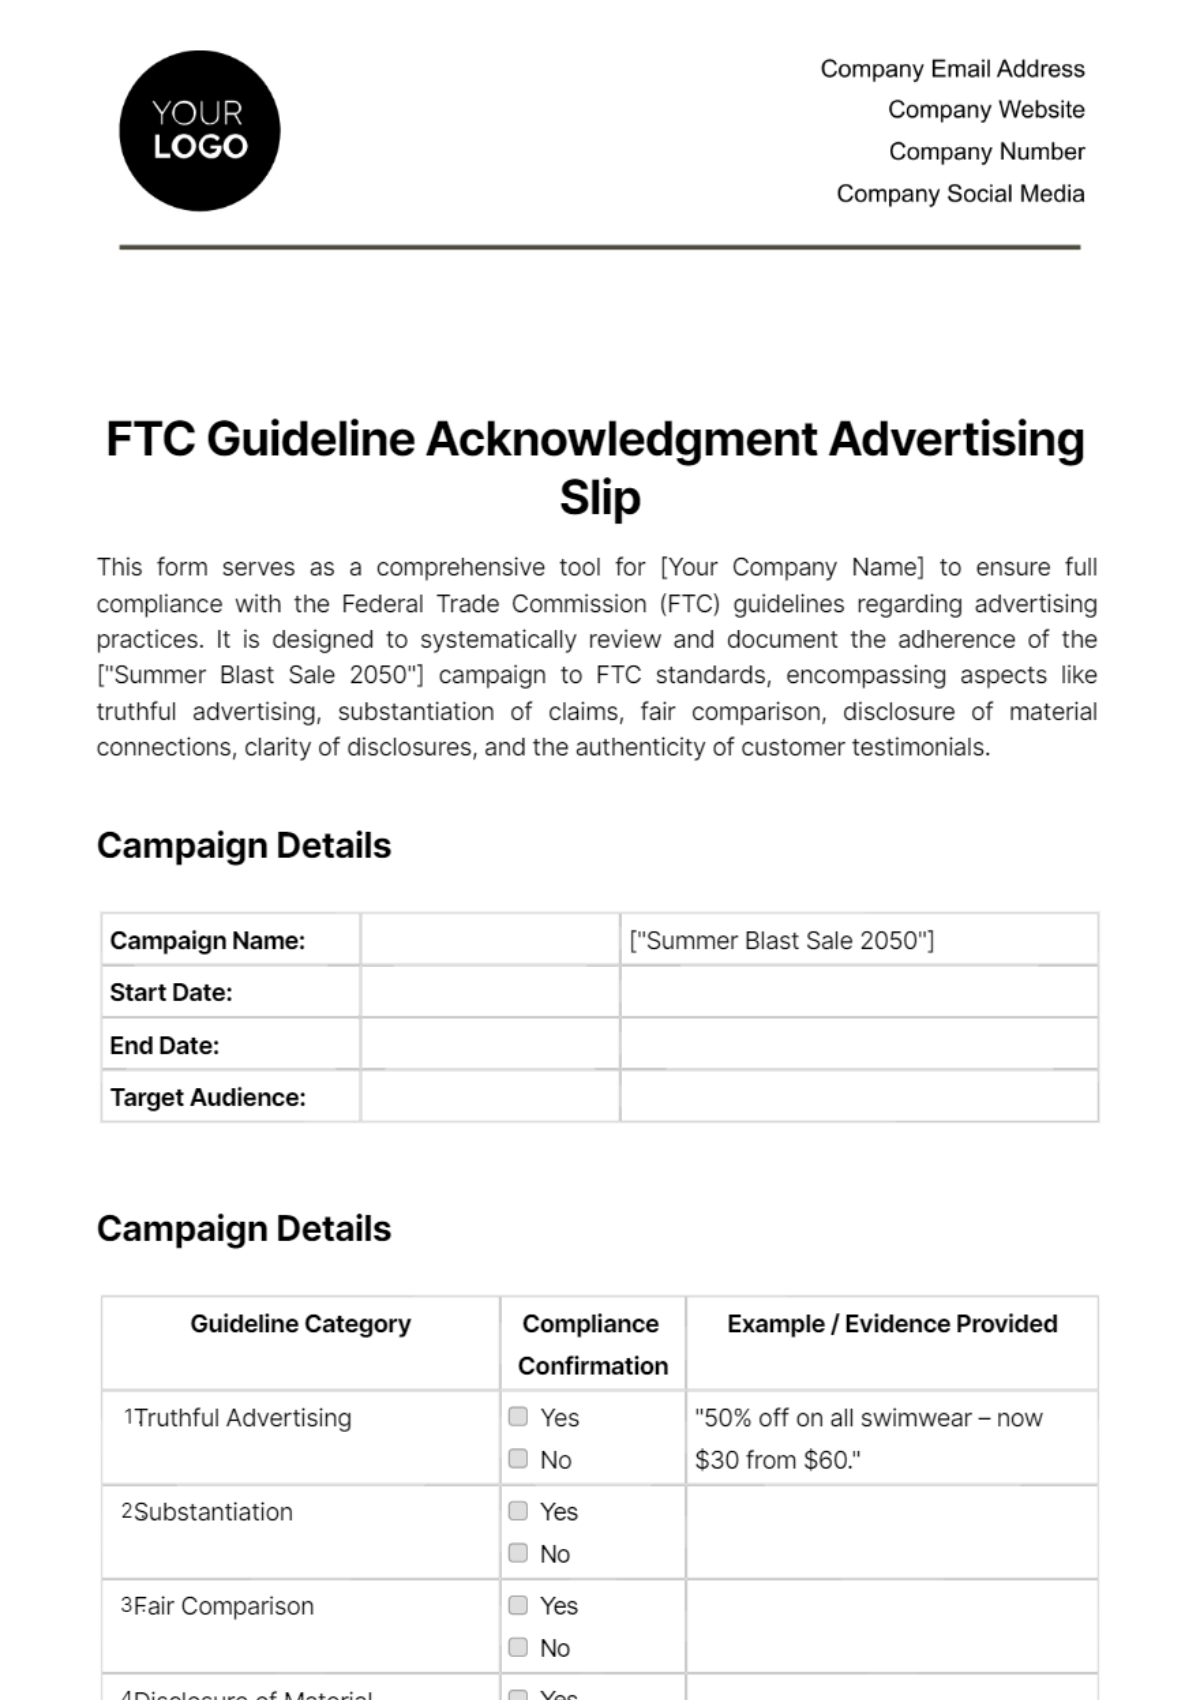 Free FTC Guideline Acknowledgment Advertising Slip Template